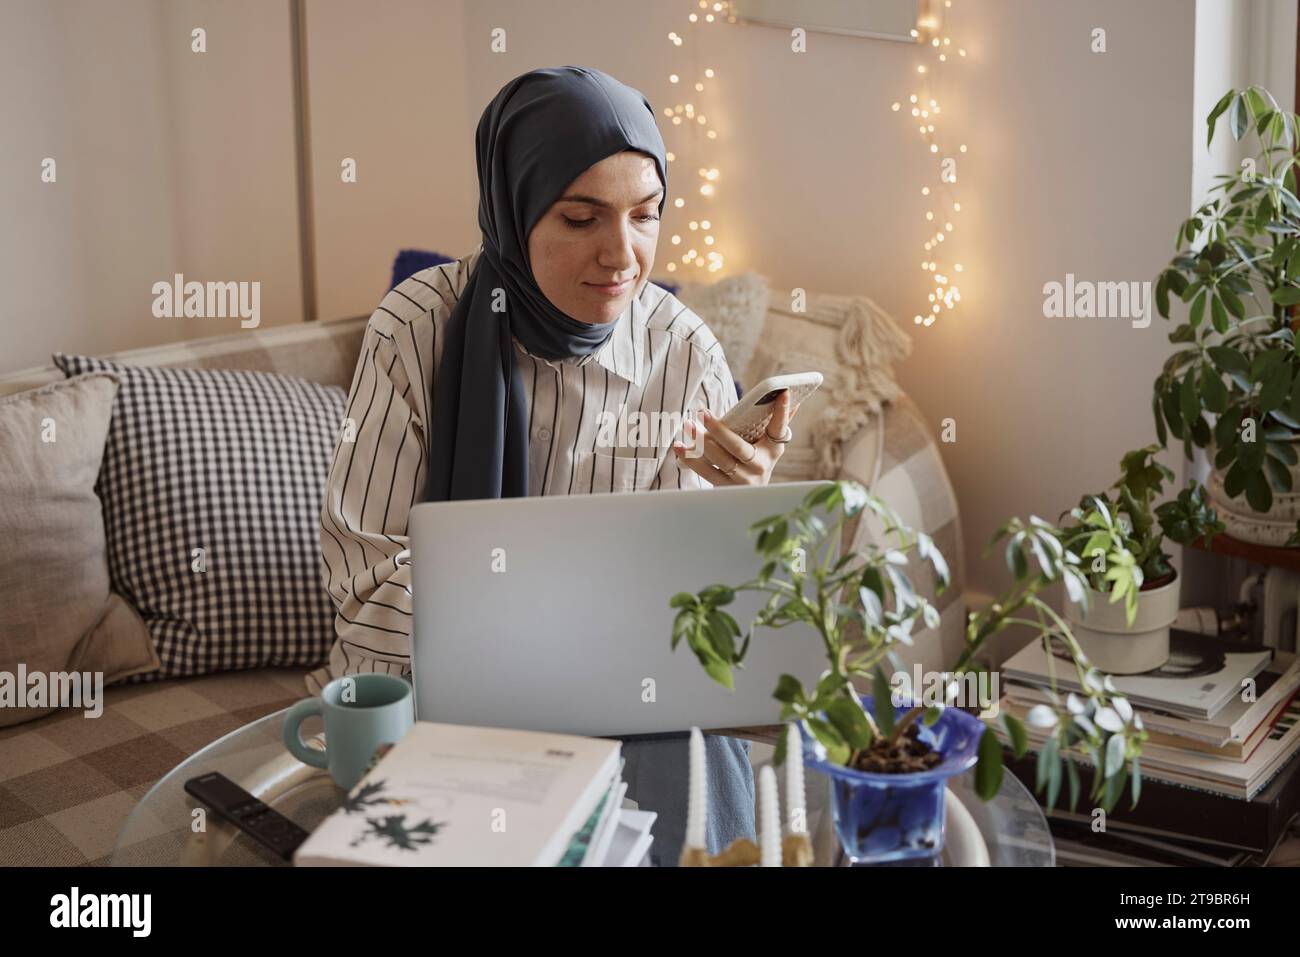 Young businesswoman using smart phone by laptop while working in living room Stock Photo